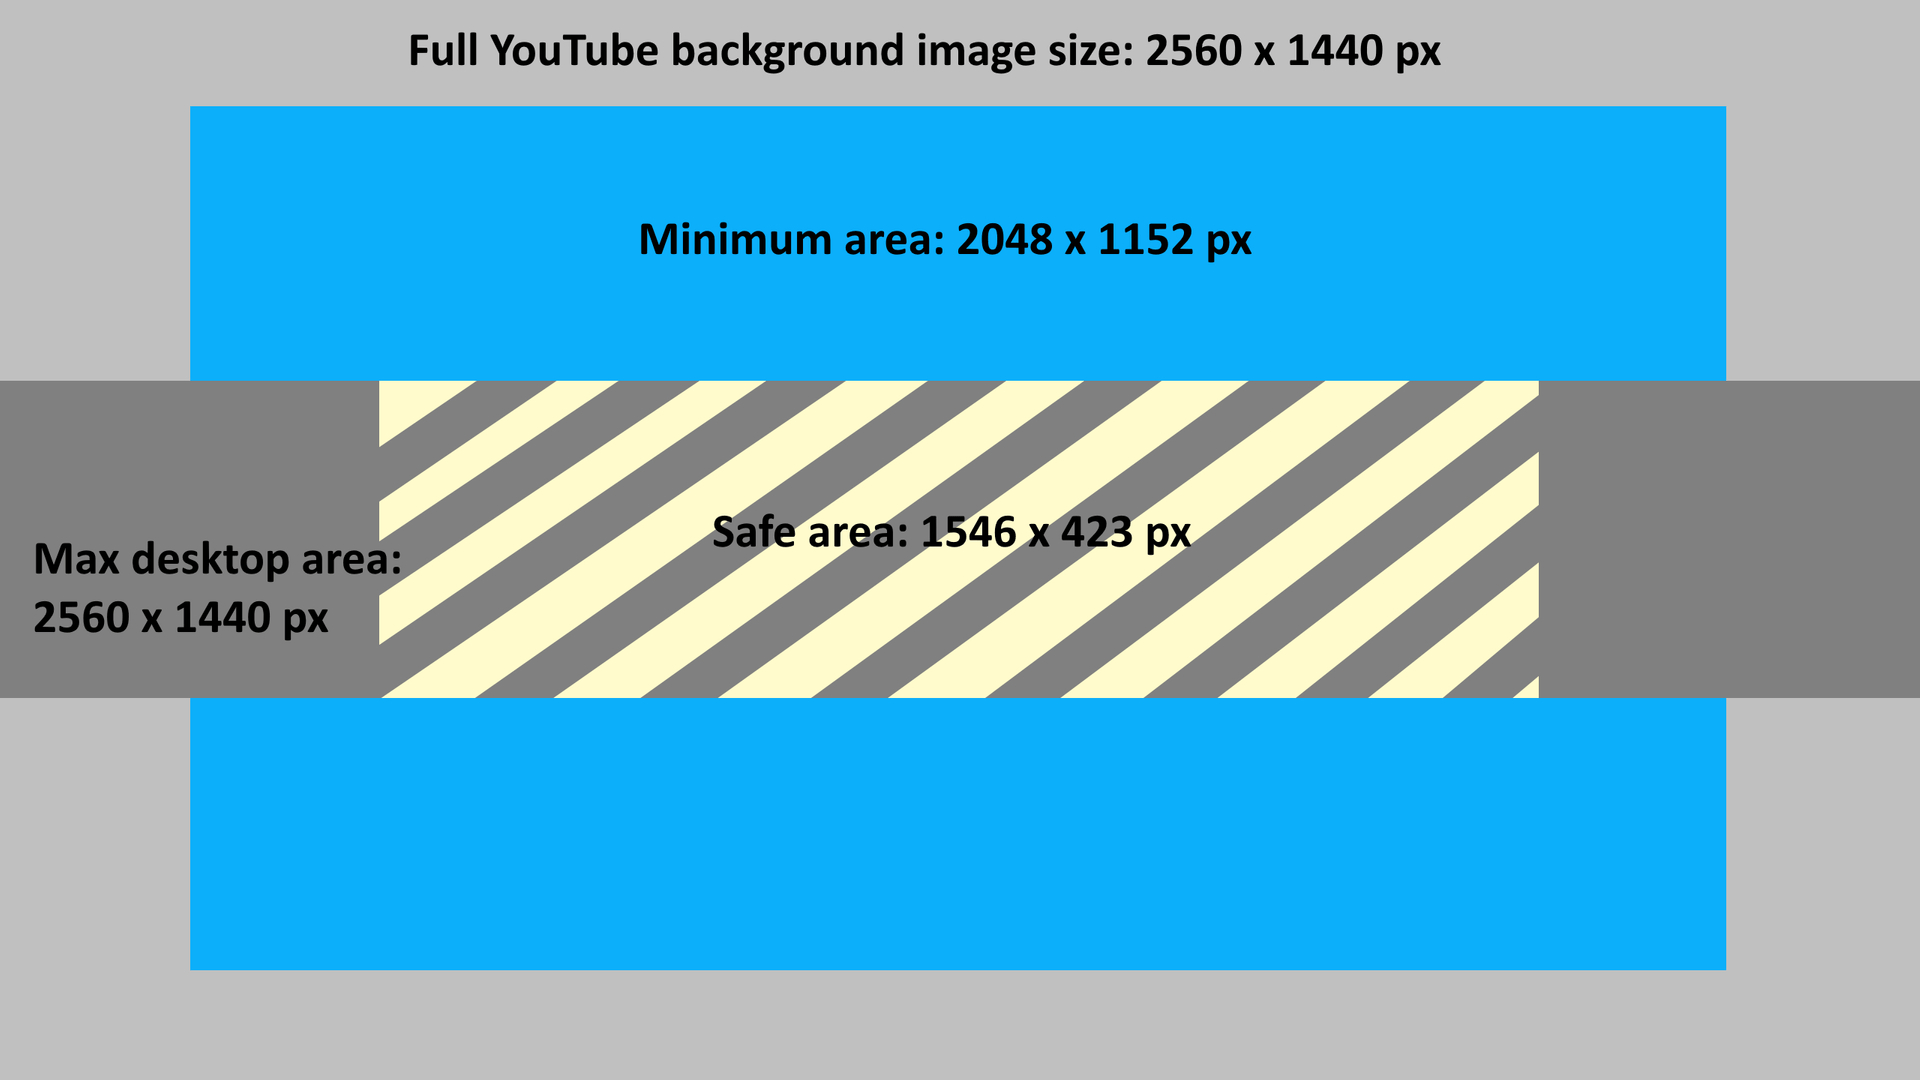 The Best Youtube Banner Size In 2020 + Best Practices For Inside Youtube Banner Template Size